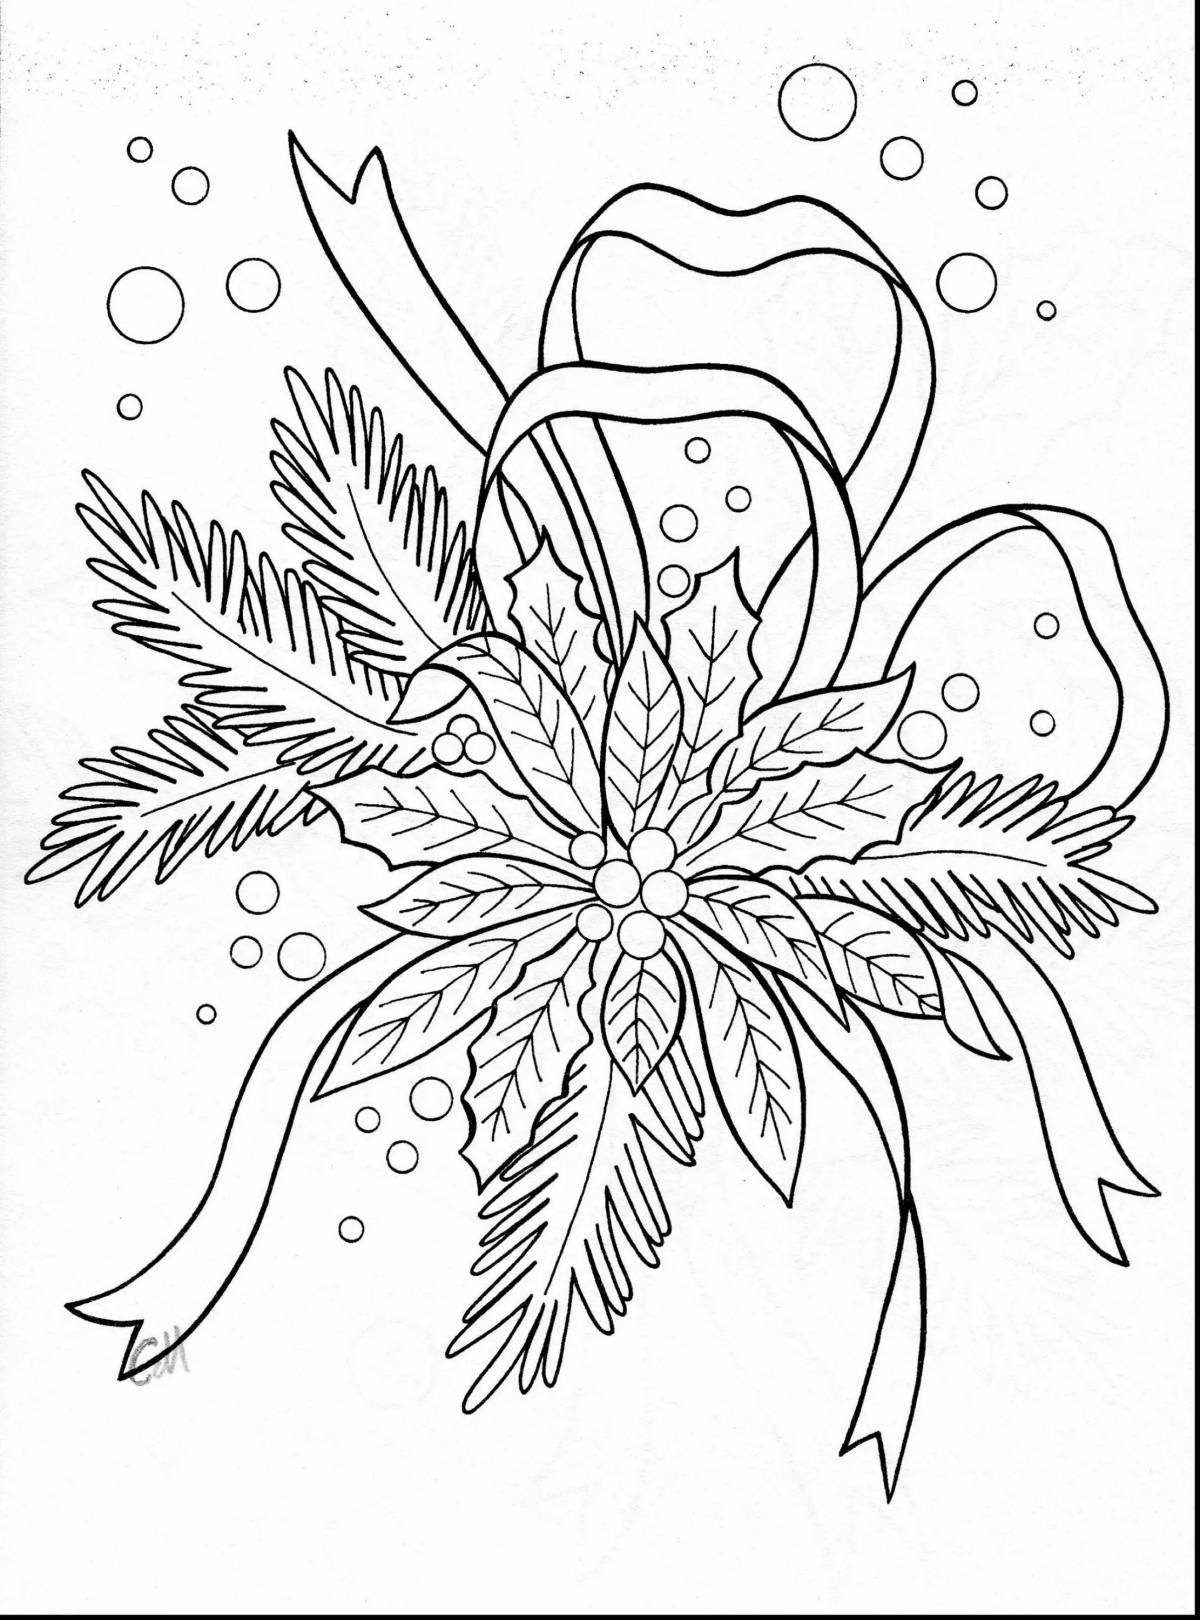 Luxury coloring pages with Christmas patterns